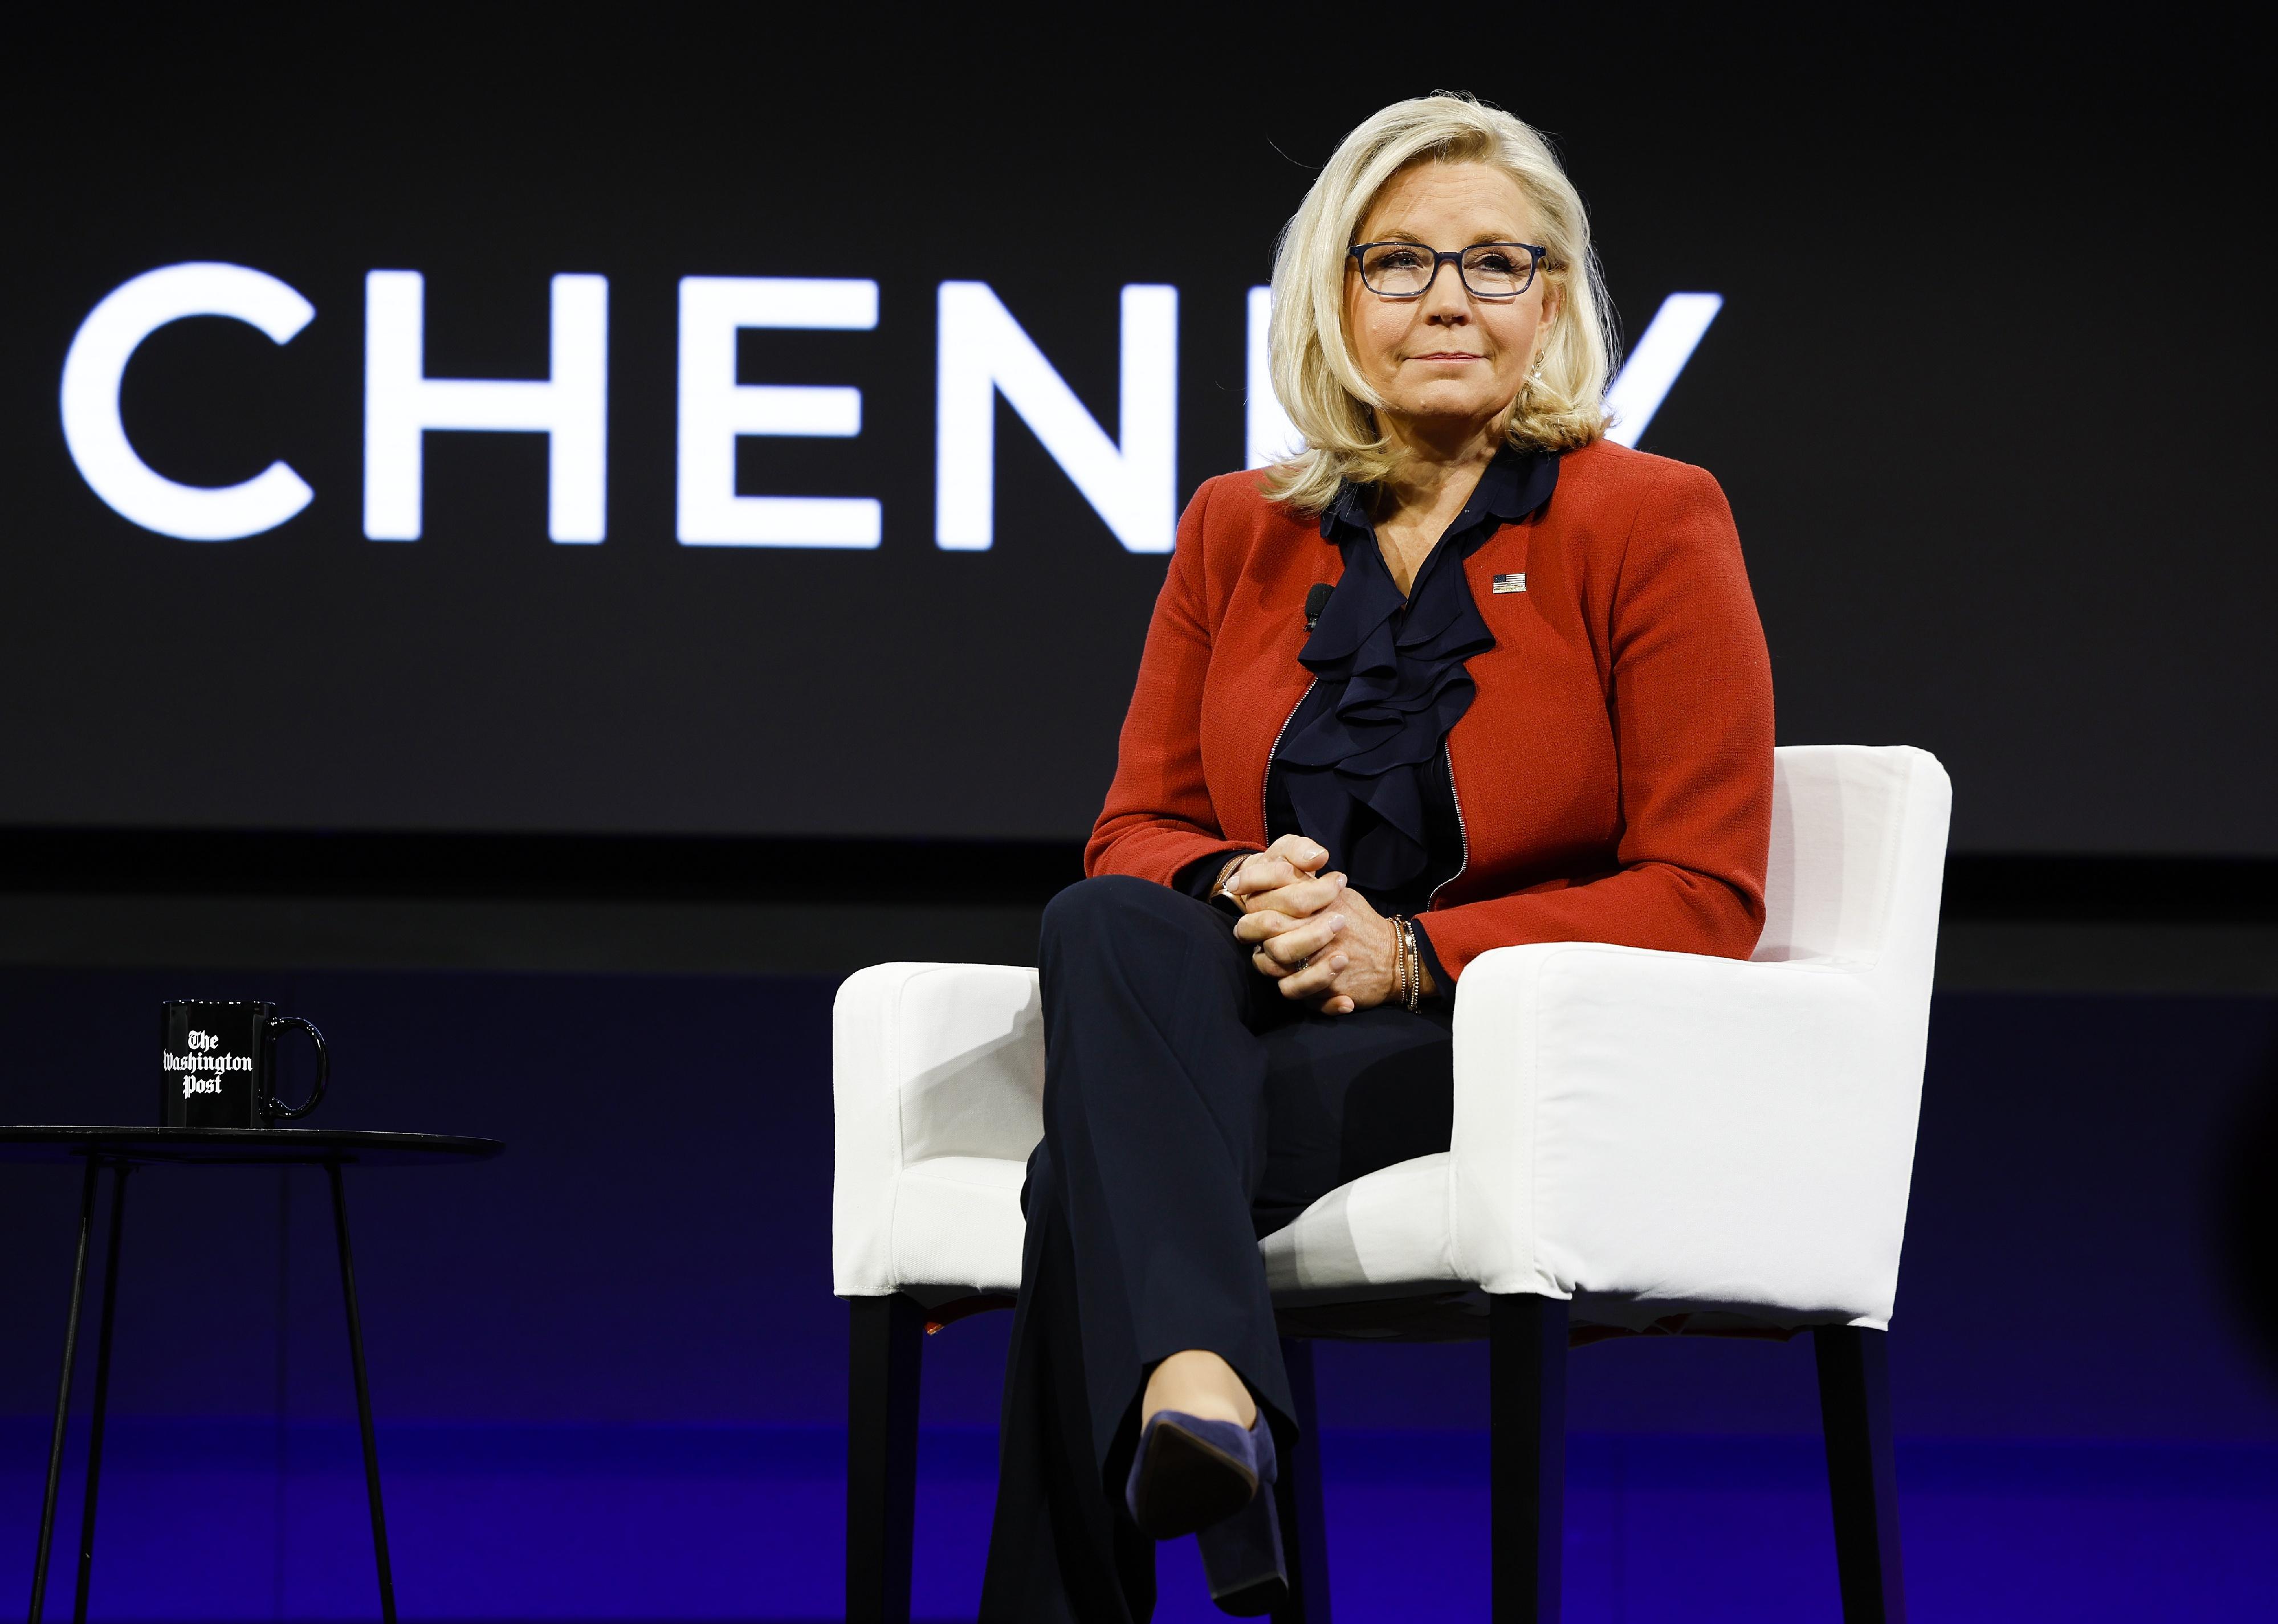 Liz Cheney on stage in black pants and a red sweater.